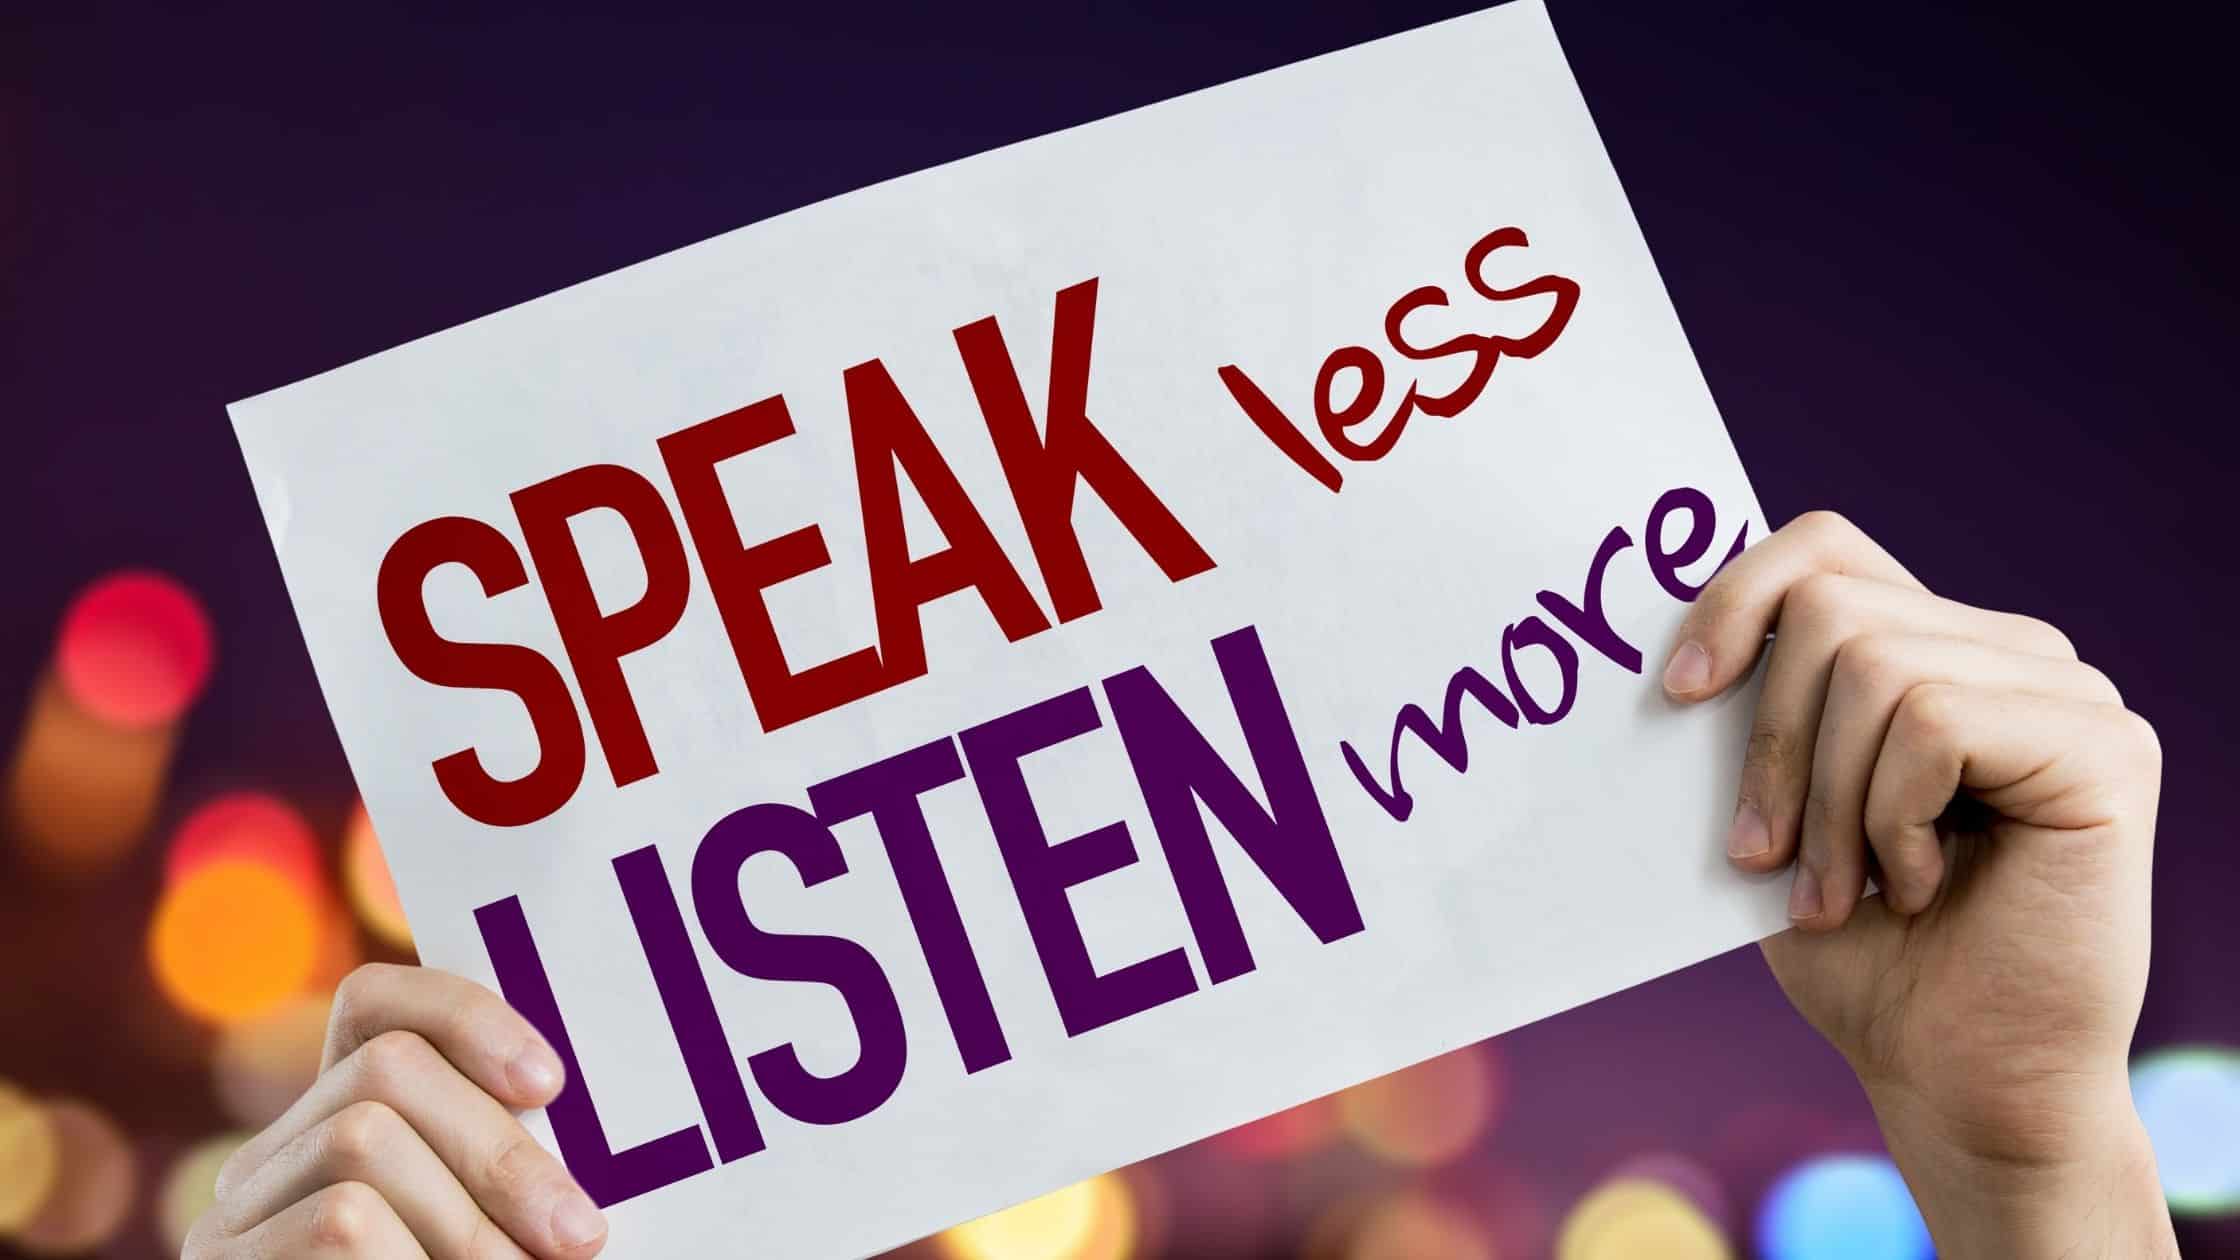 Improve Active Listening A Critical Leadership Skill